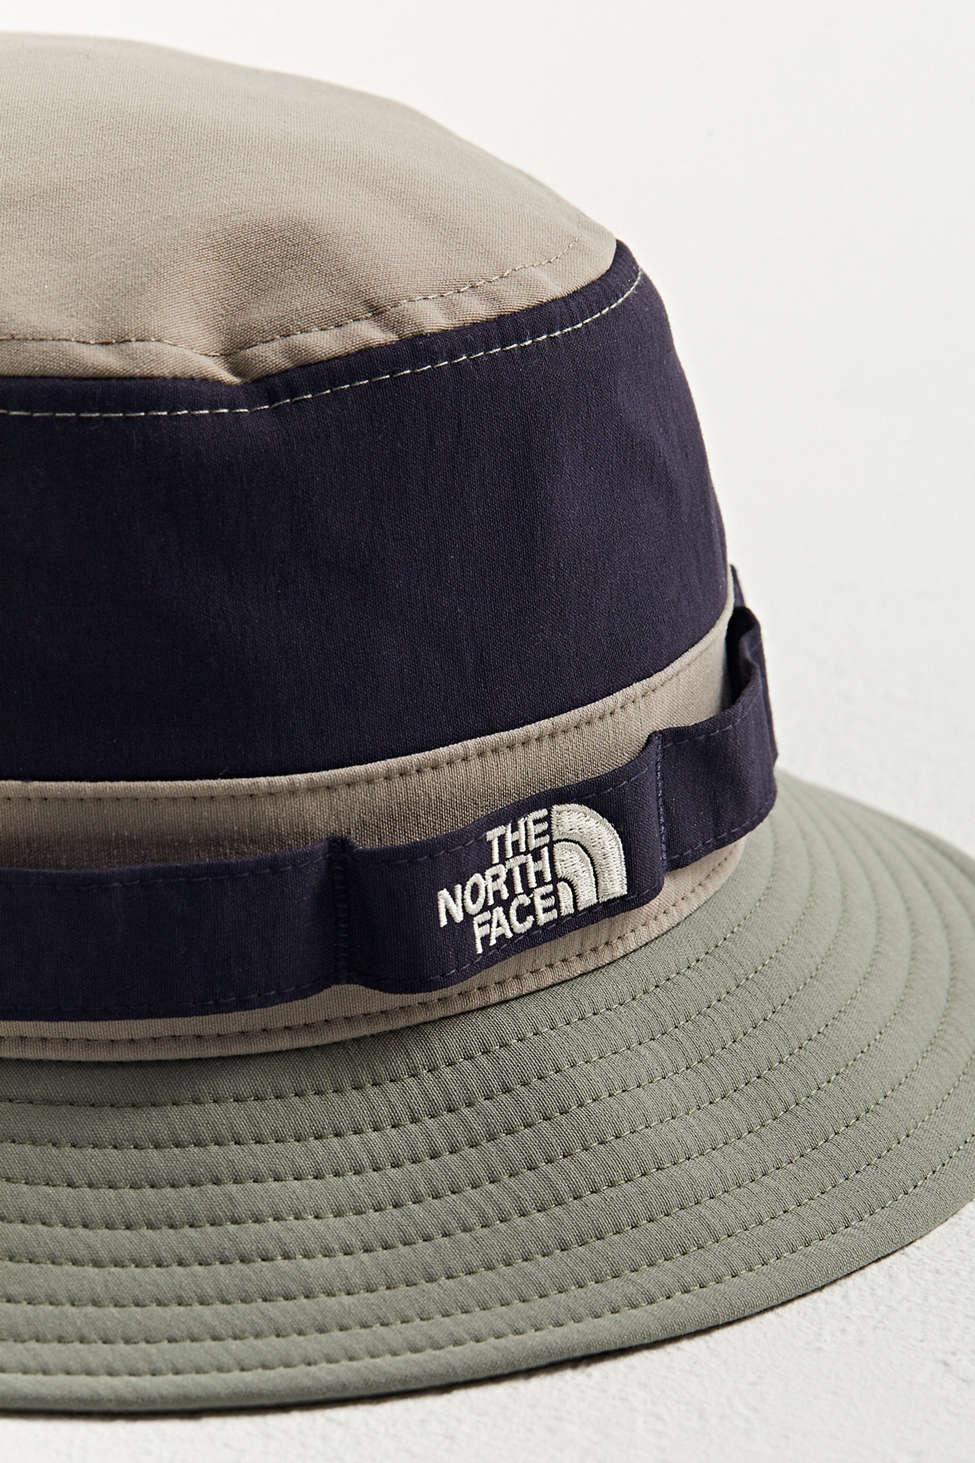 The North Face Class V Brimmer Bucket Hat in Black for Men